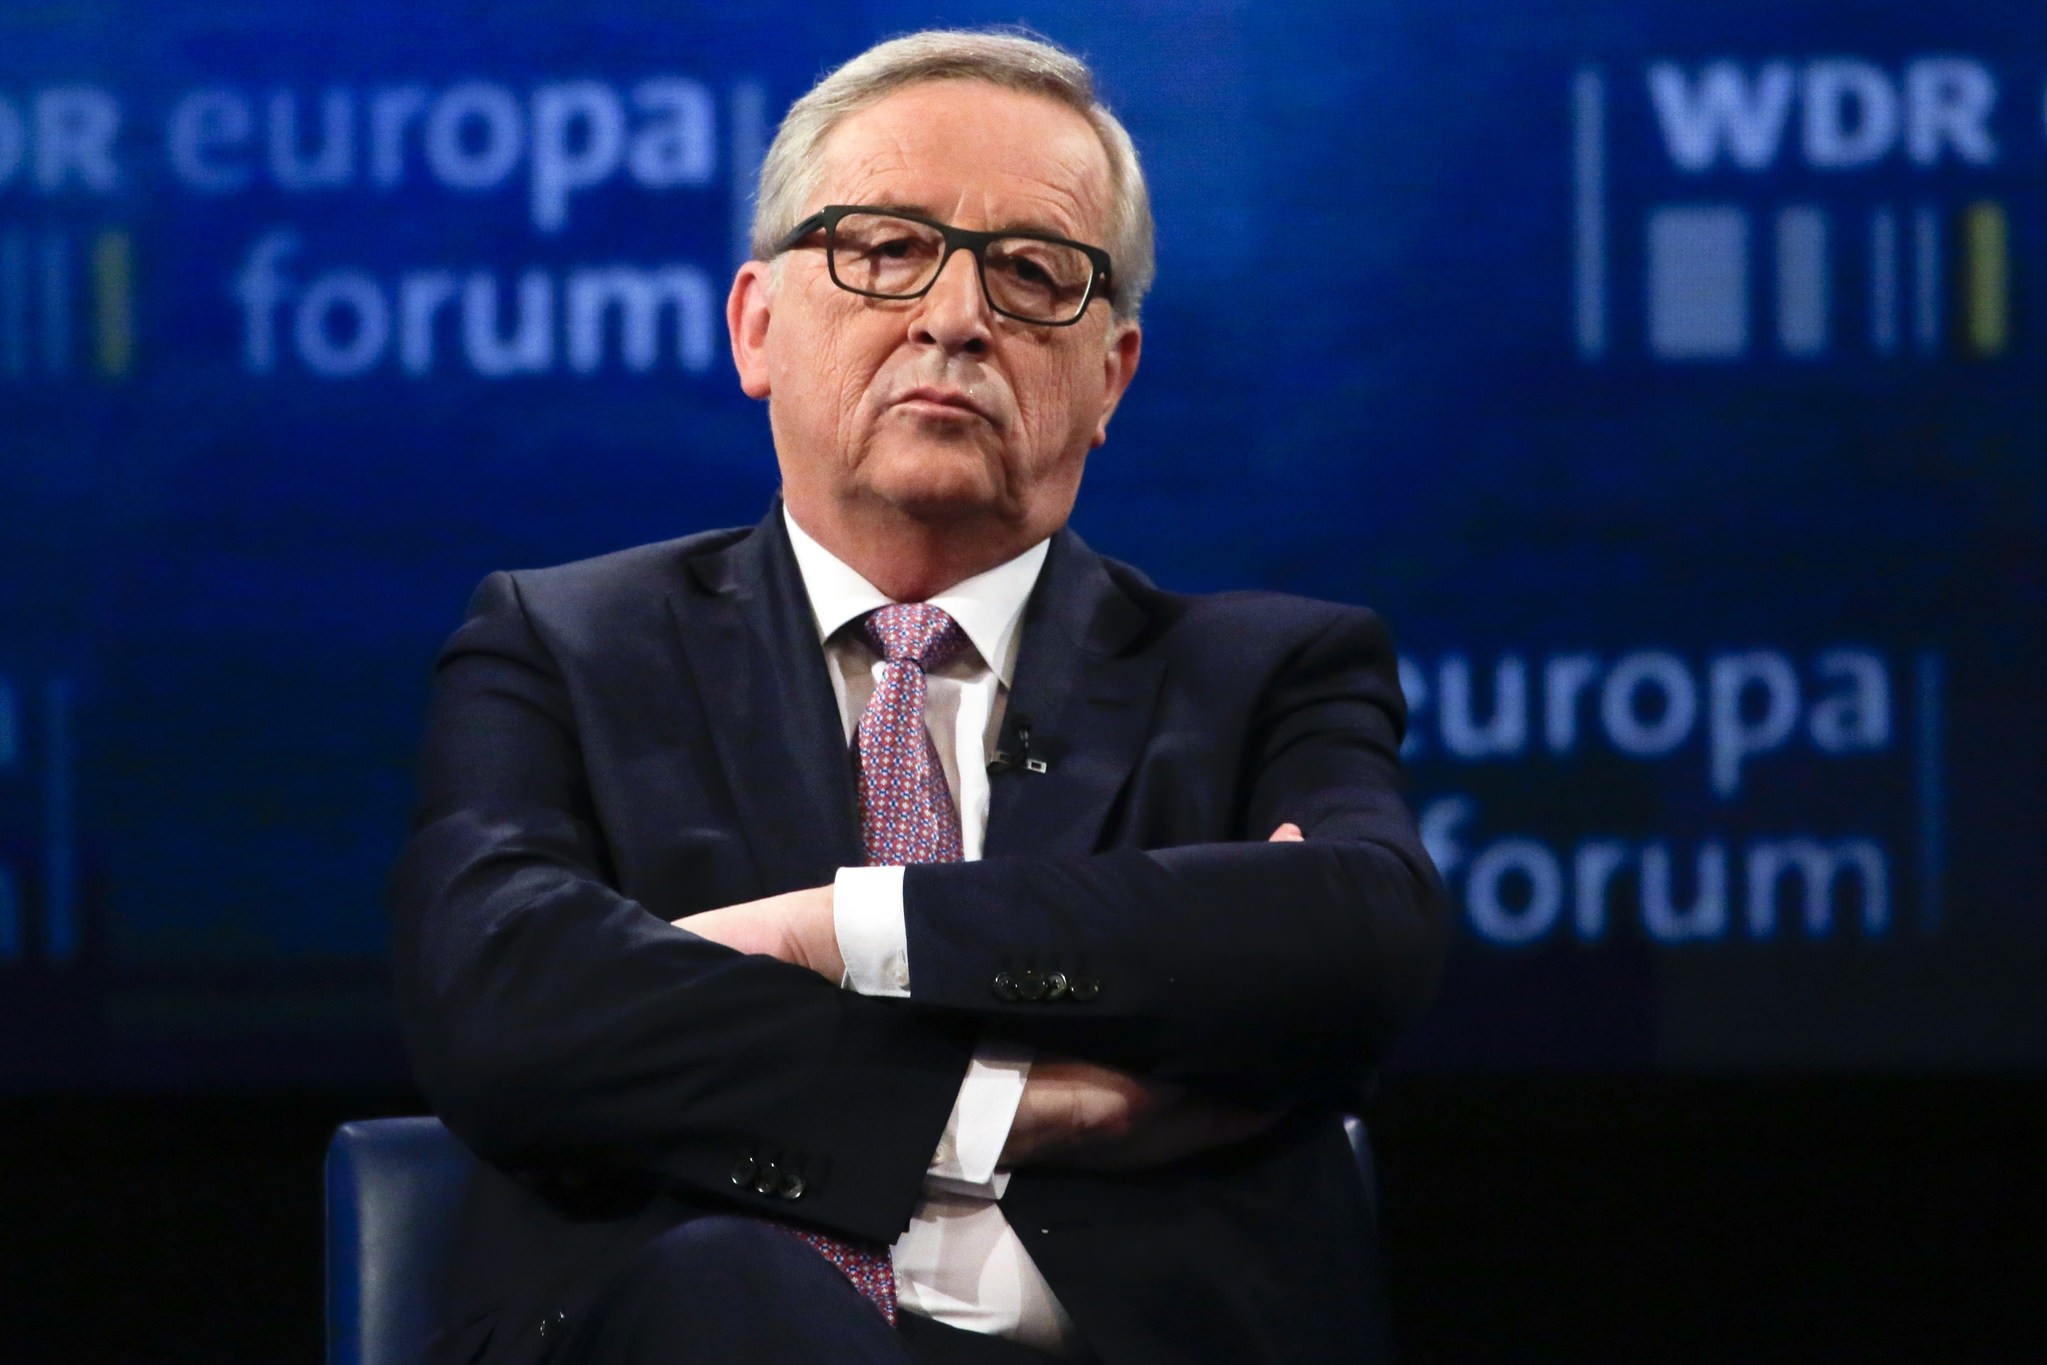 The President on the European Commission Jean-Claude Junker (AP Photo)